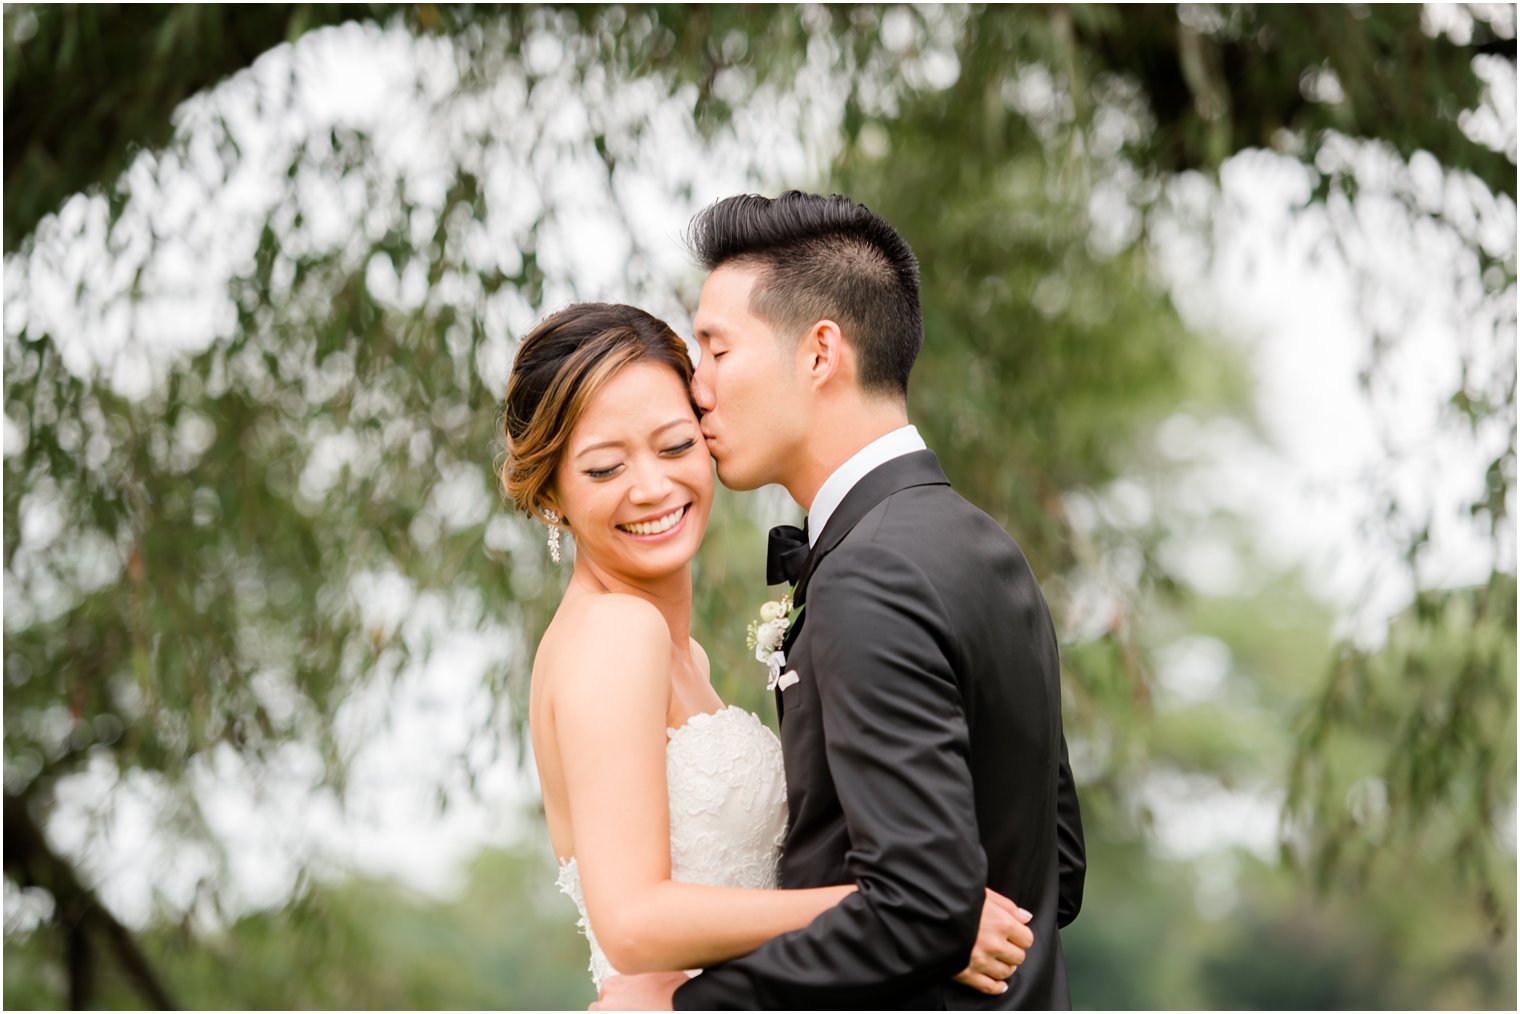 groom gives bride a kiss on wedding day photographed by Idalia Photography